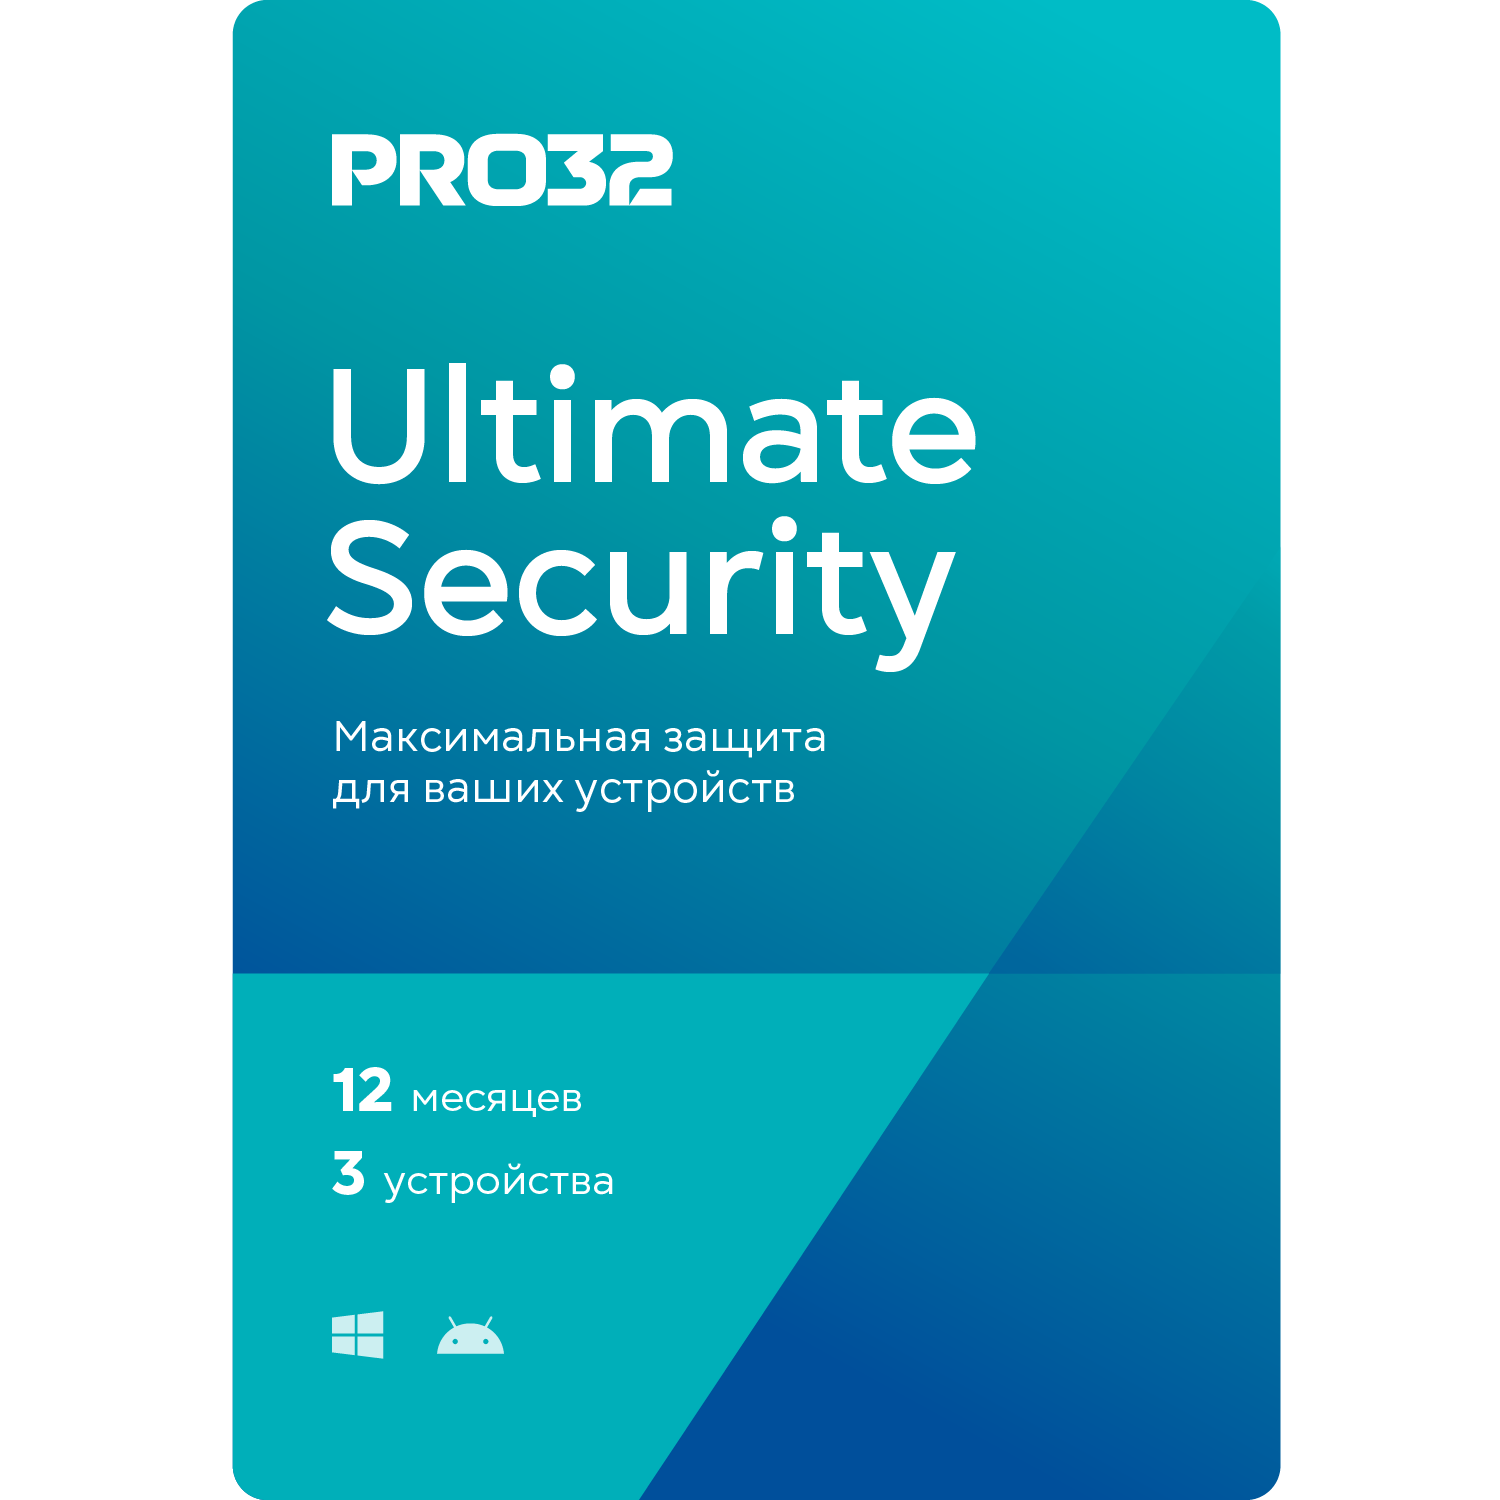 NEW - PRO32 Ultimate Security